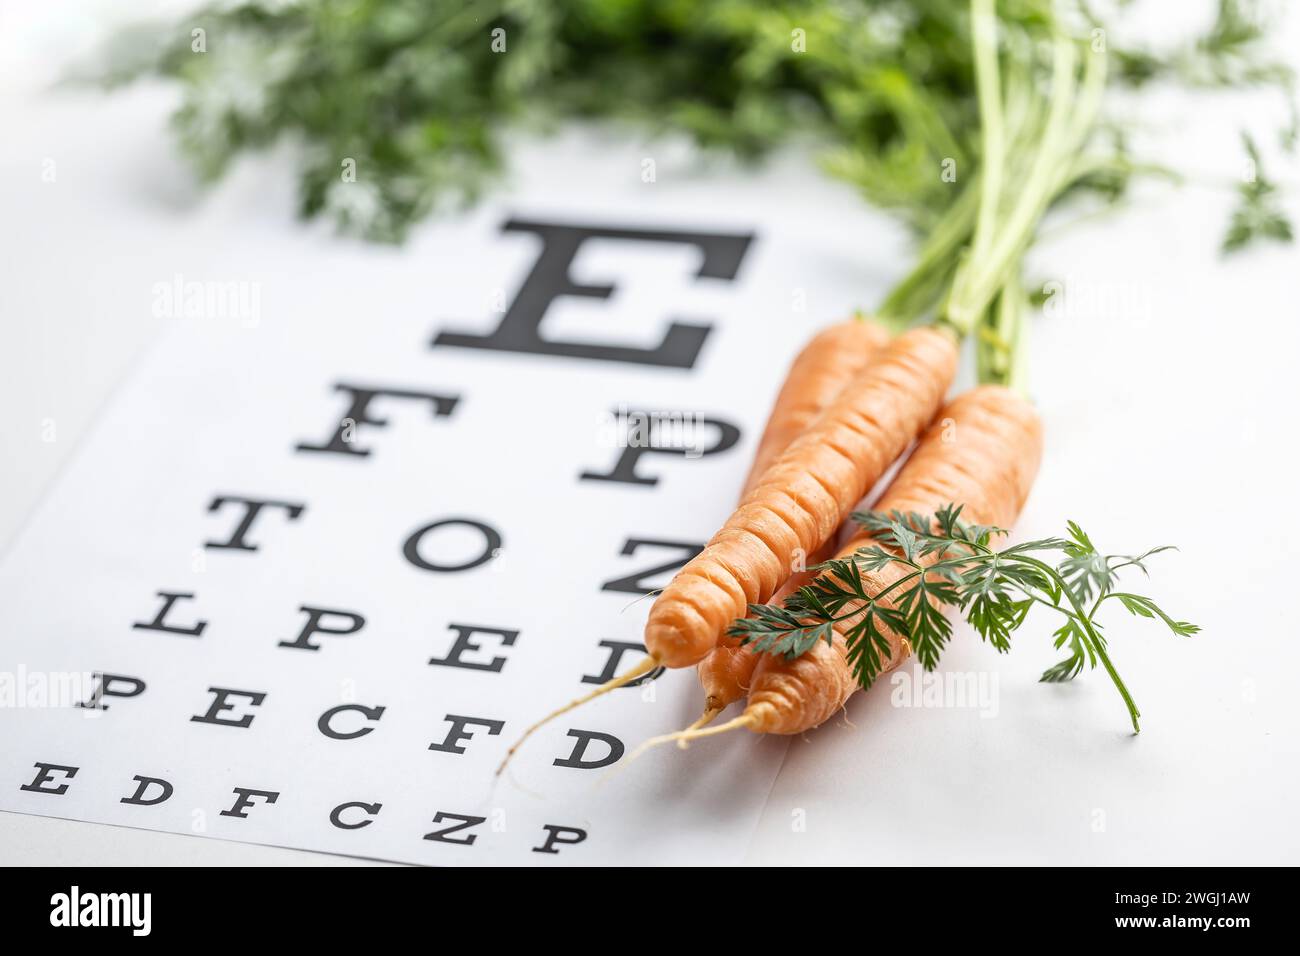 Fresh carrots as a source of vitamin A placed on the eye test chart. Stock Photo